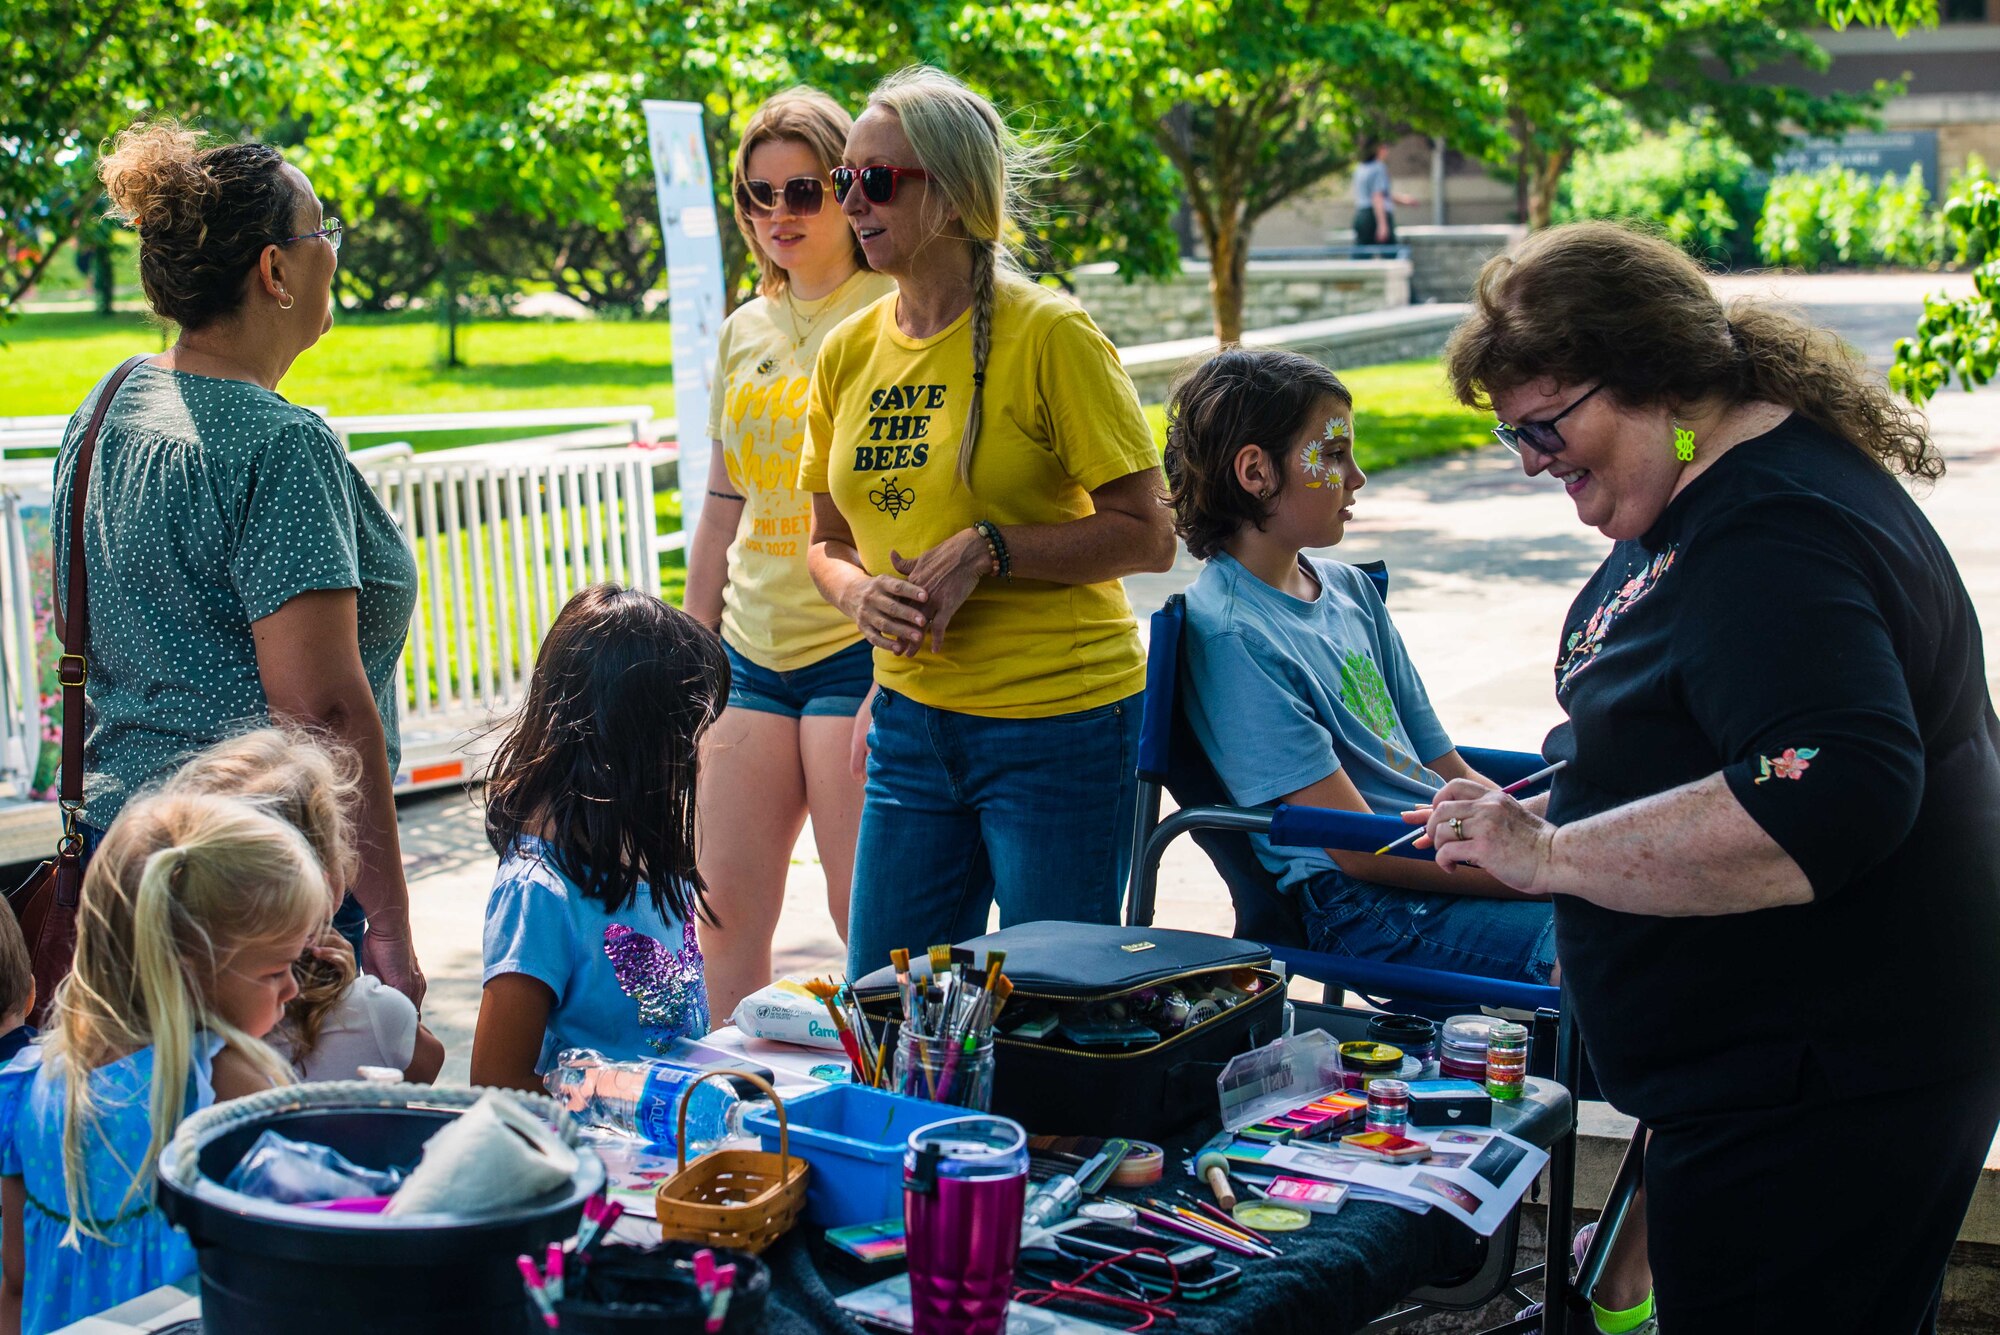 Danielle Trevino, center, biological scientist with the 88th Civil Engineer Group’s Environmental Branch, talks with guests while coworker, Melanie Pershing, right, paints the faces of children attending the Pollinator Expo at the Wright Brothers Memorial, June 21 at the Wright-Brothers Memorial, Dayton, Ohio.  
This is the fifth year of the Pollinator Expo which was started to bring awareness about the decline of pollinator populations. (U.S. Air Force photo by Airman 1st Class James Johnson)